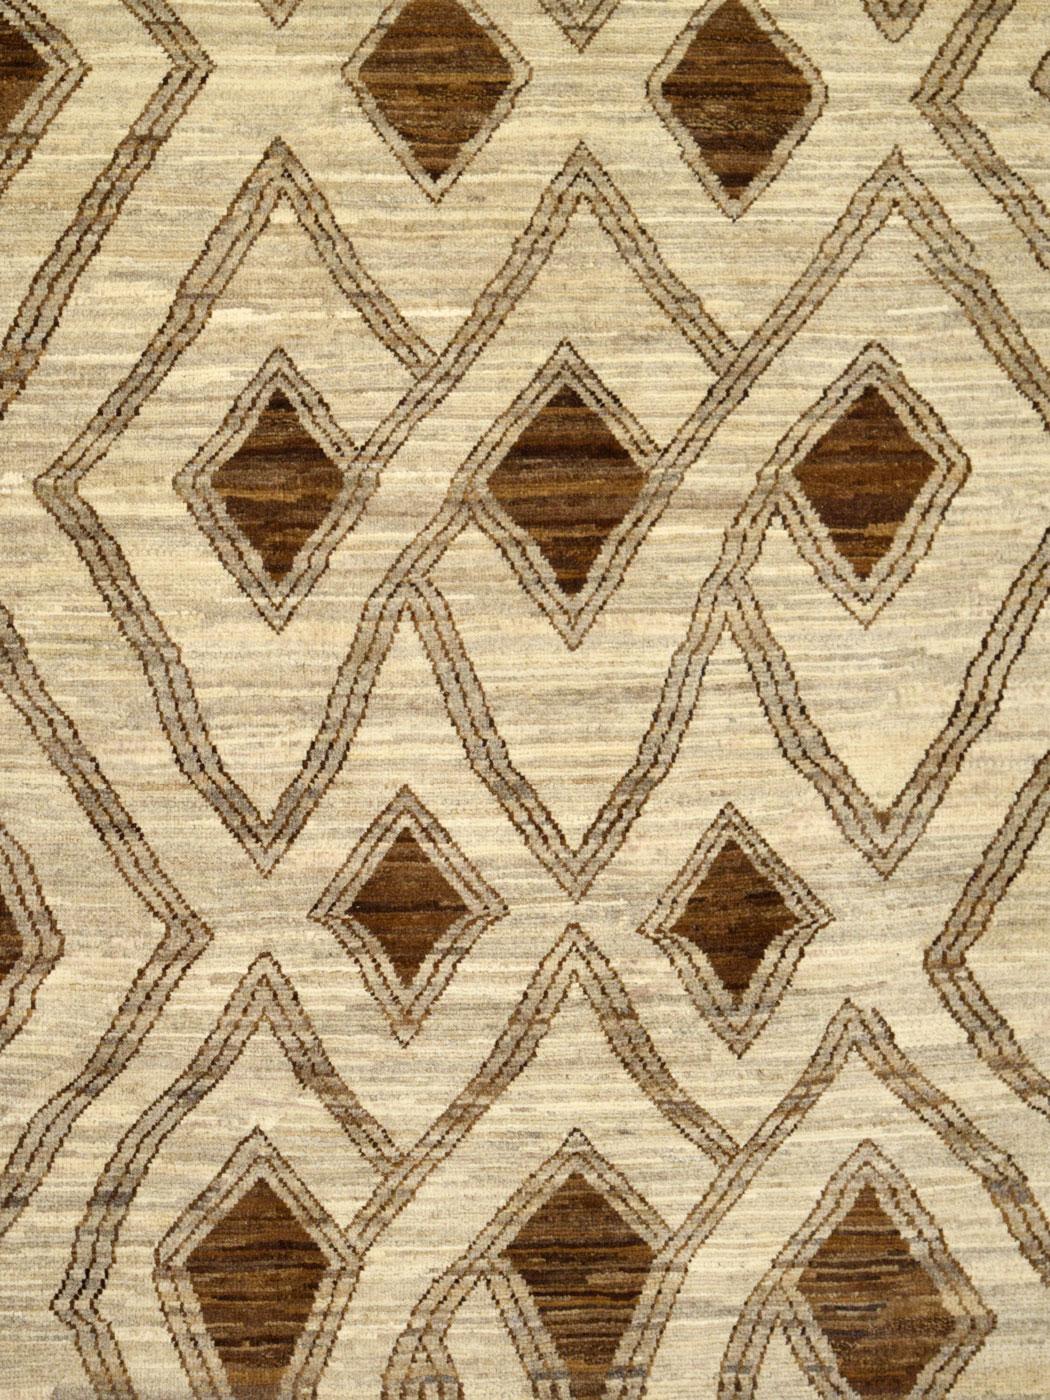 Hand-Knotted Modern Geometric Neutral Wool Carpet in Brown and Cream, 6' x 9' For Sale